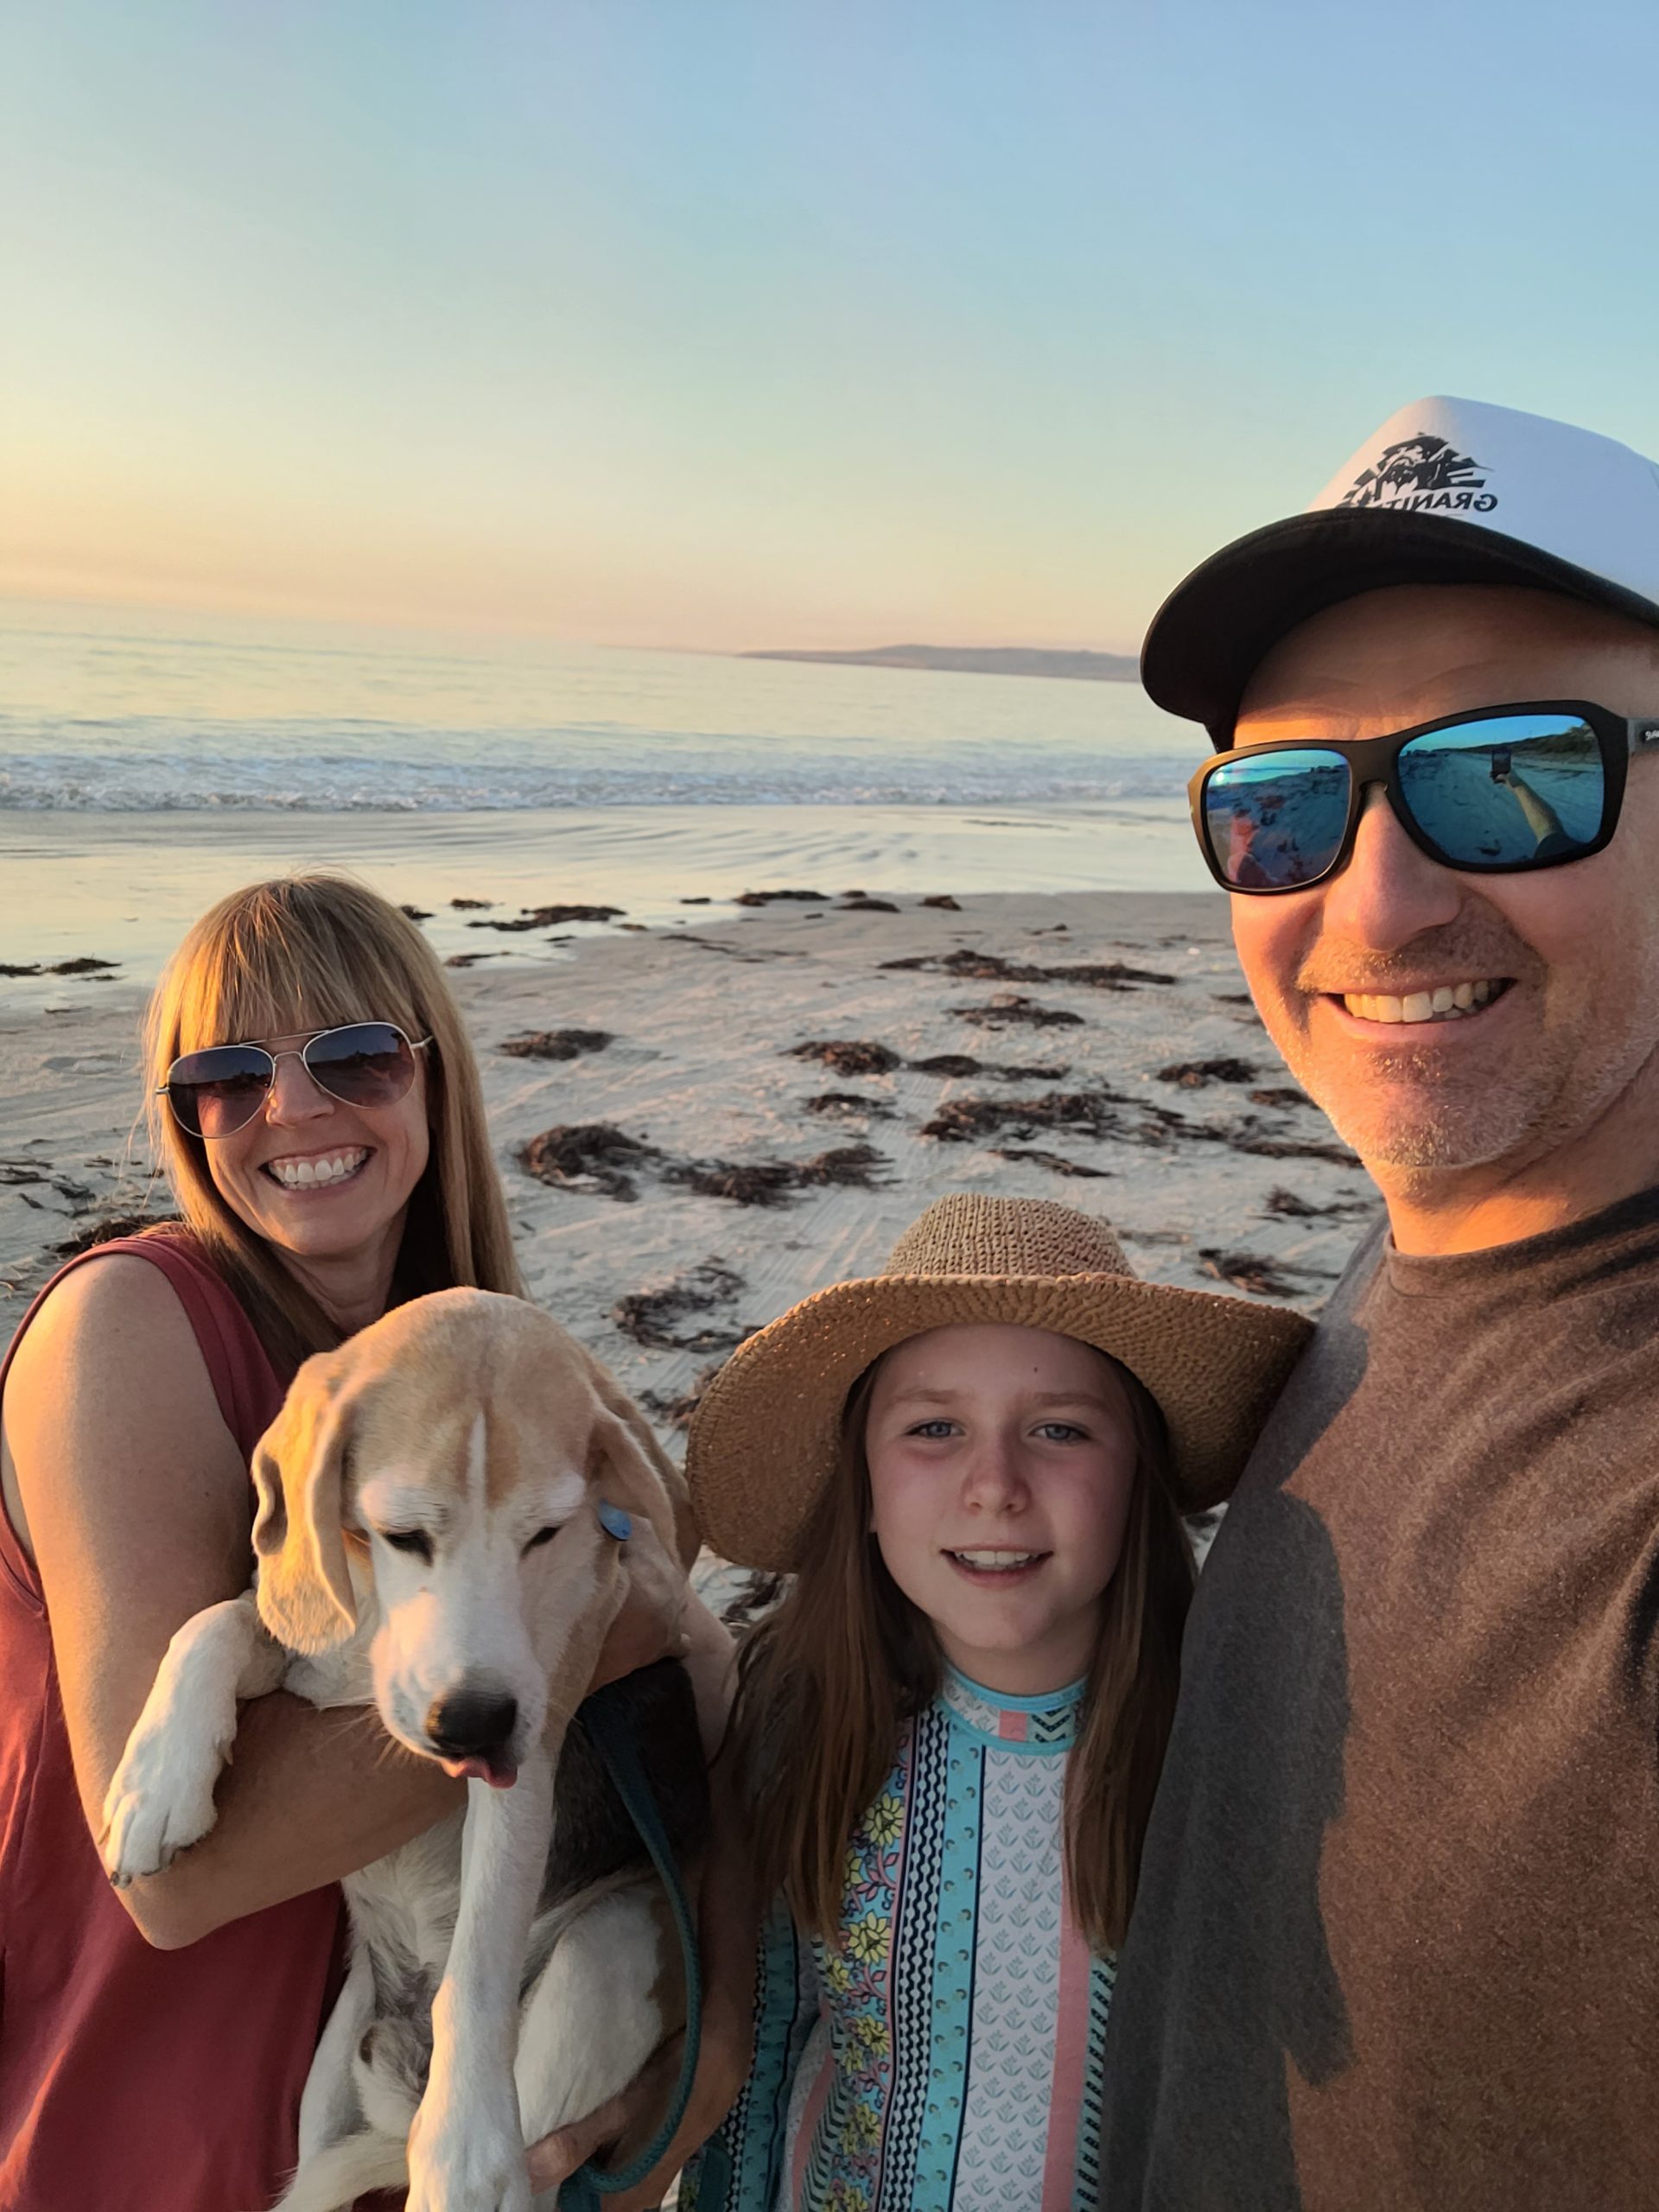 Social Ladder director Steve Davenport and his family and dog on an beach during sunset.